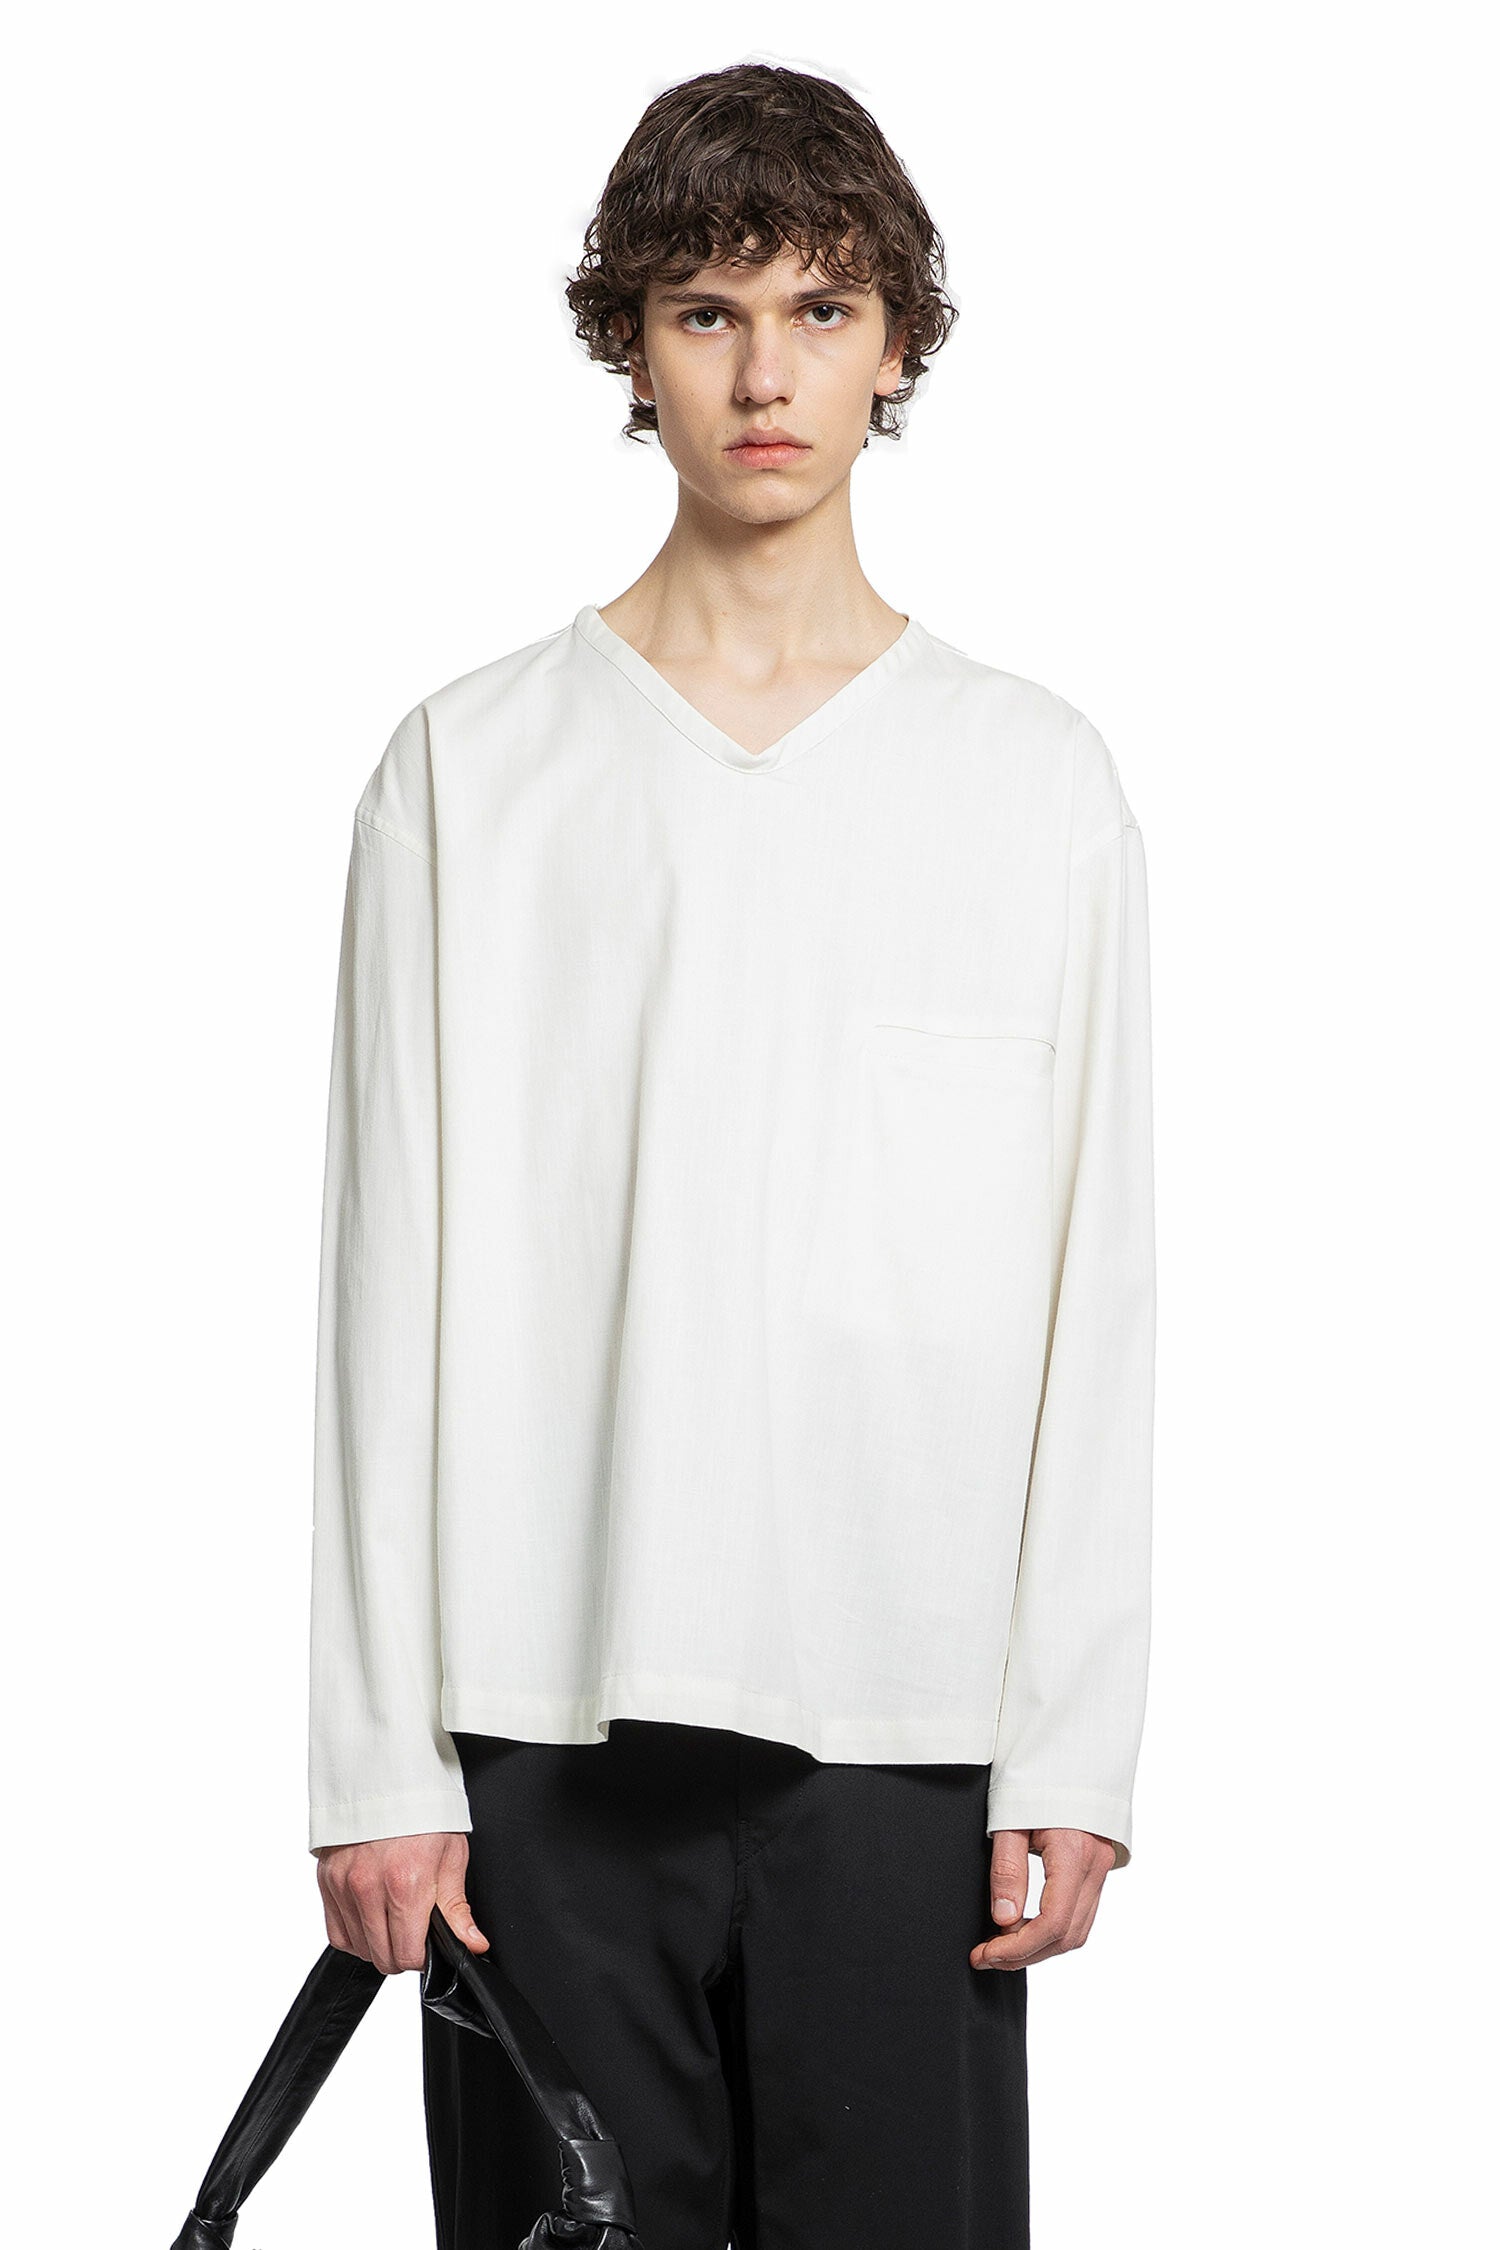 LEMAIRE MAN WHITE T-SHIRTS & TANK TOPS